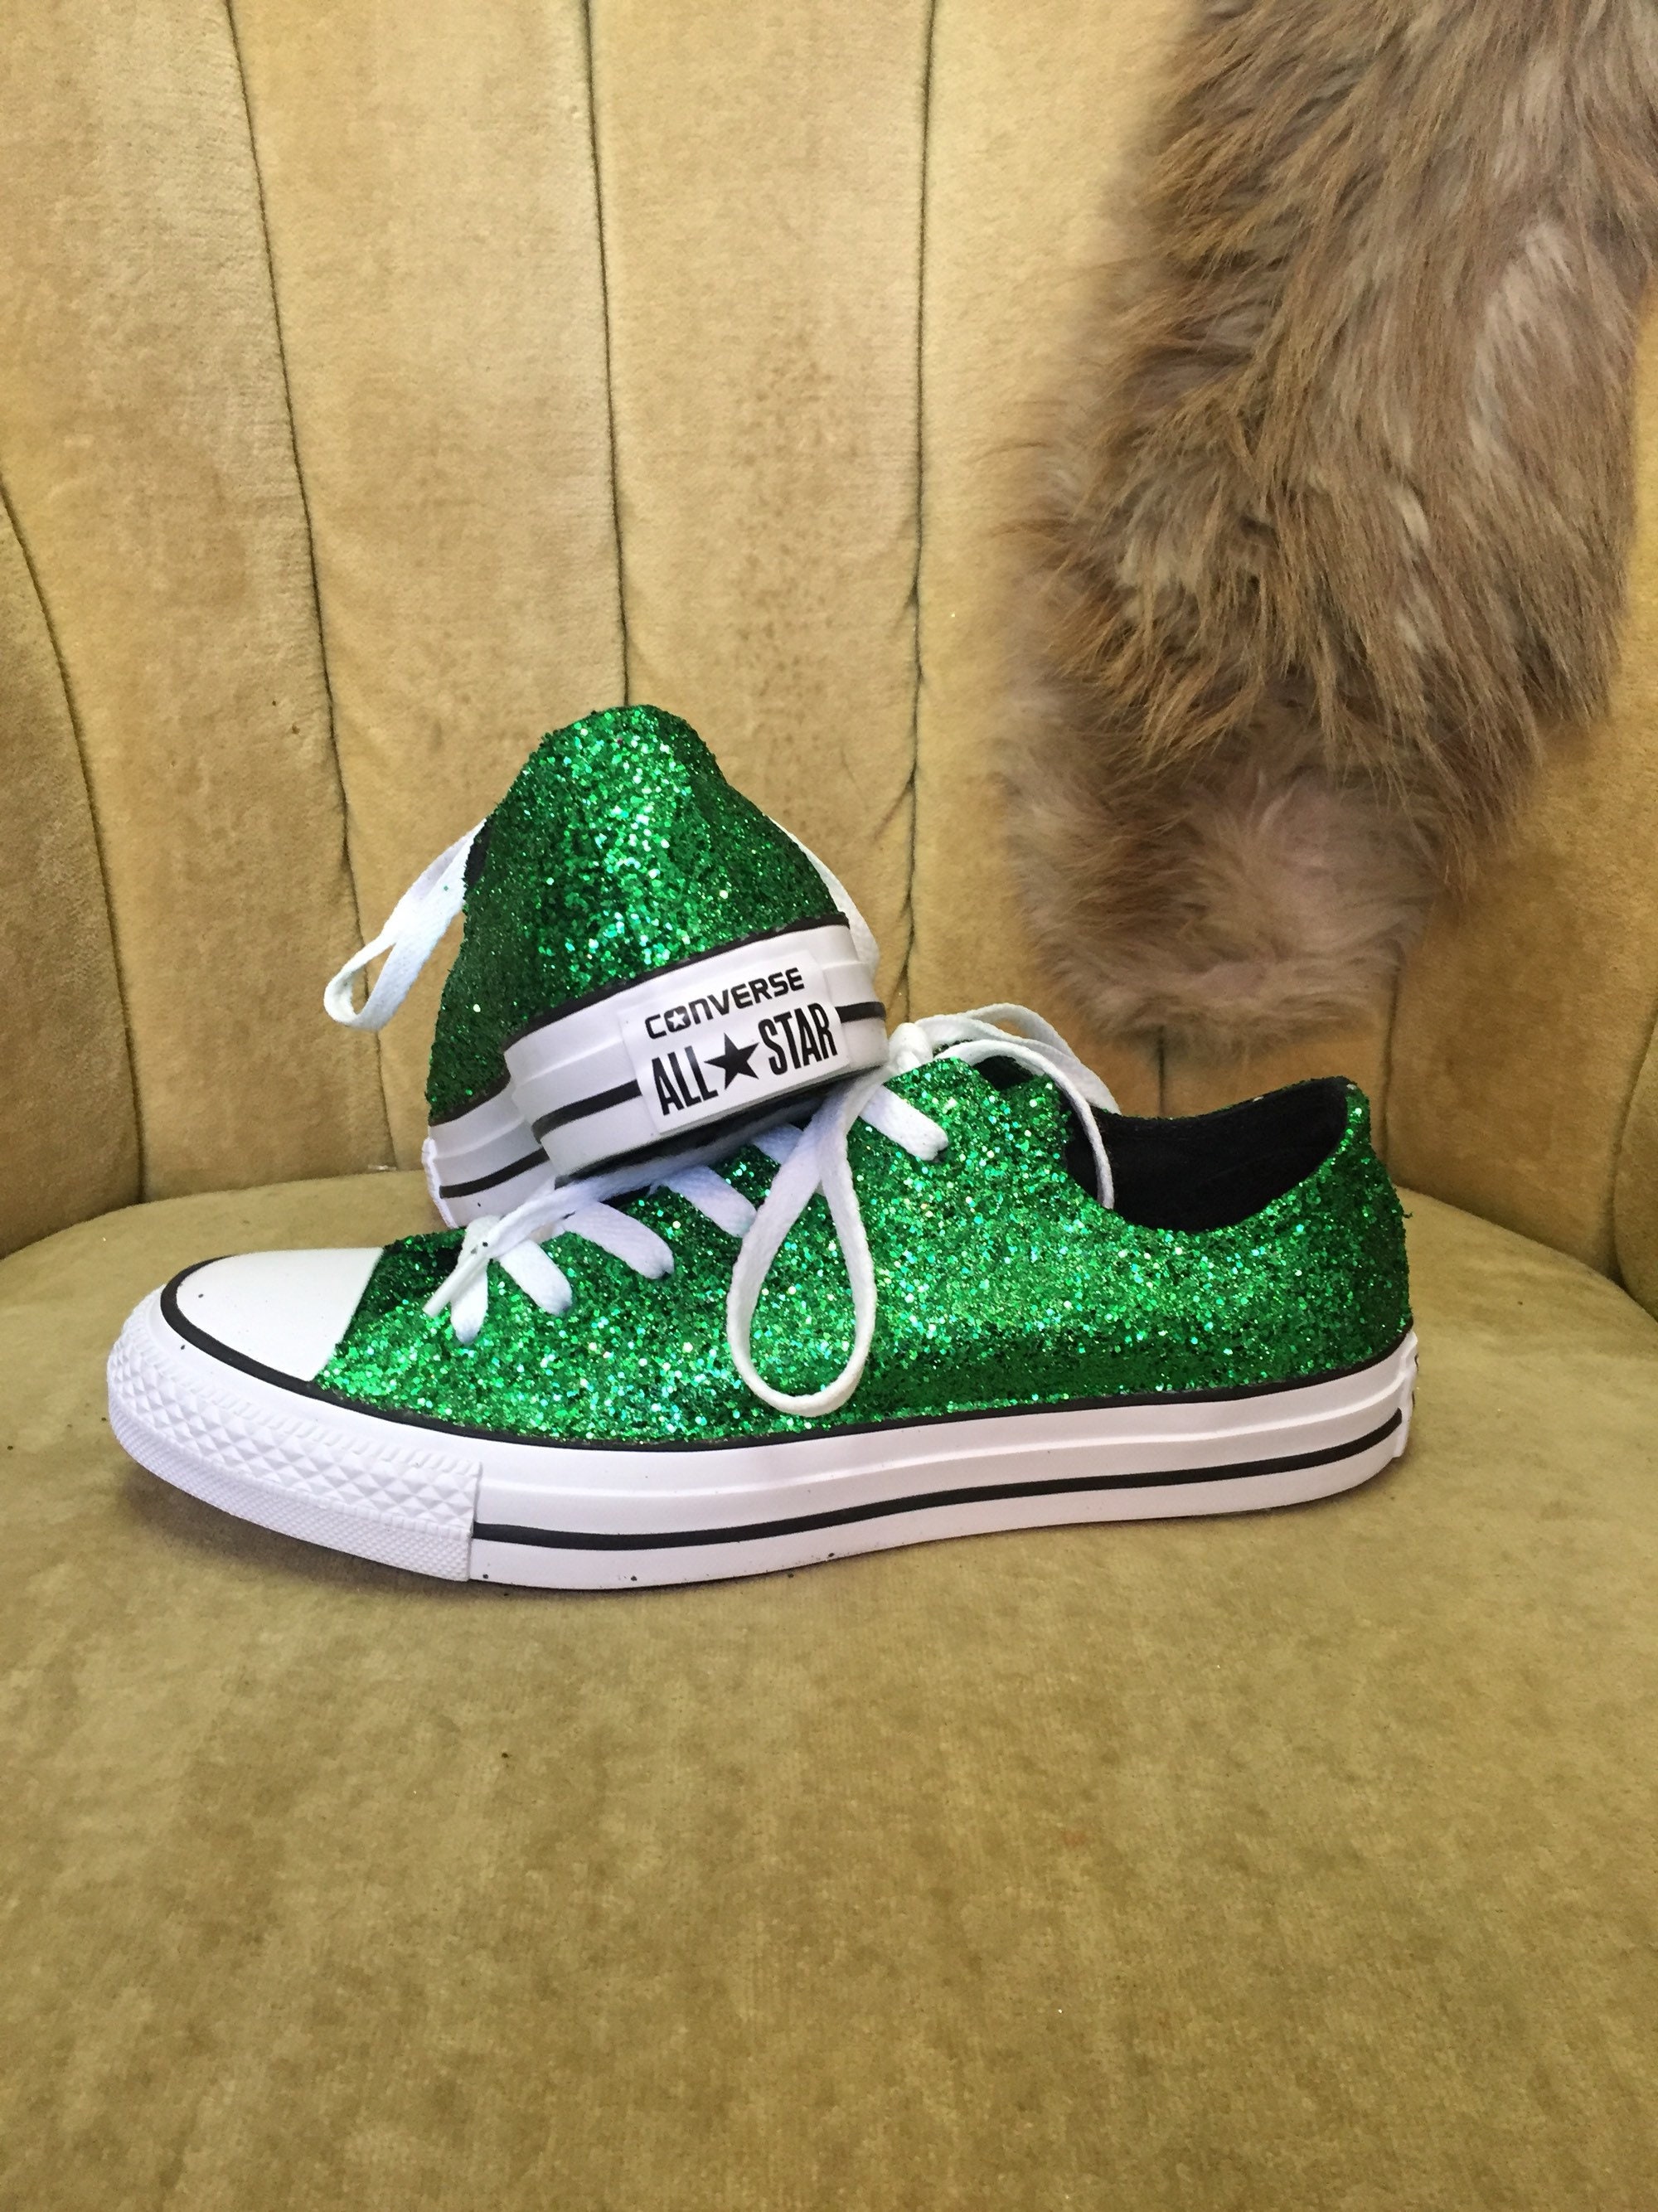 Drejning Kritisk rulletrappe Authentic Converse All Stars in Green Glitter Glitter - Etsy